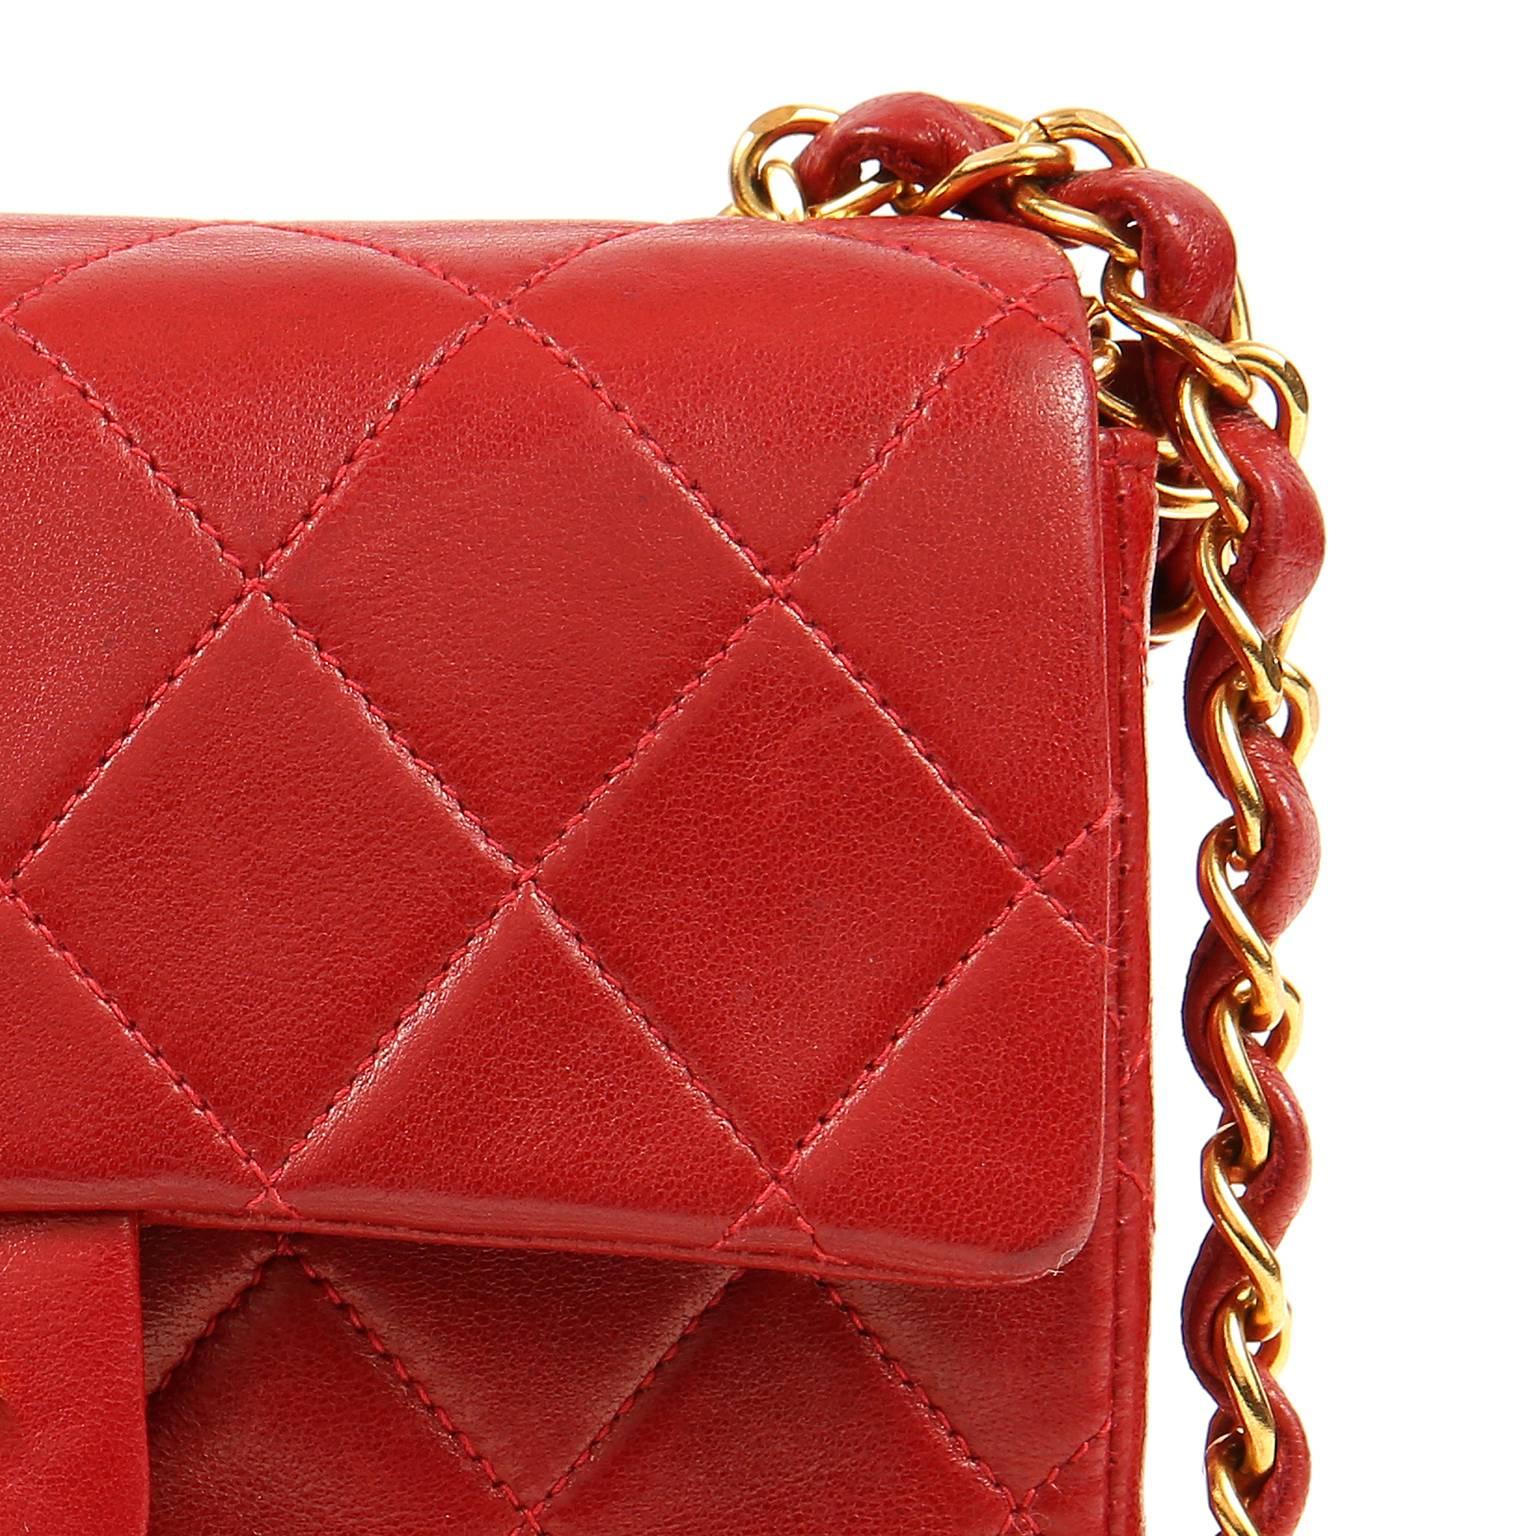 Chanel Red Lambskin Mini Classic Flap bag with GHW 2